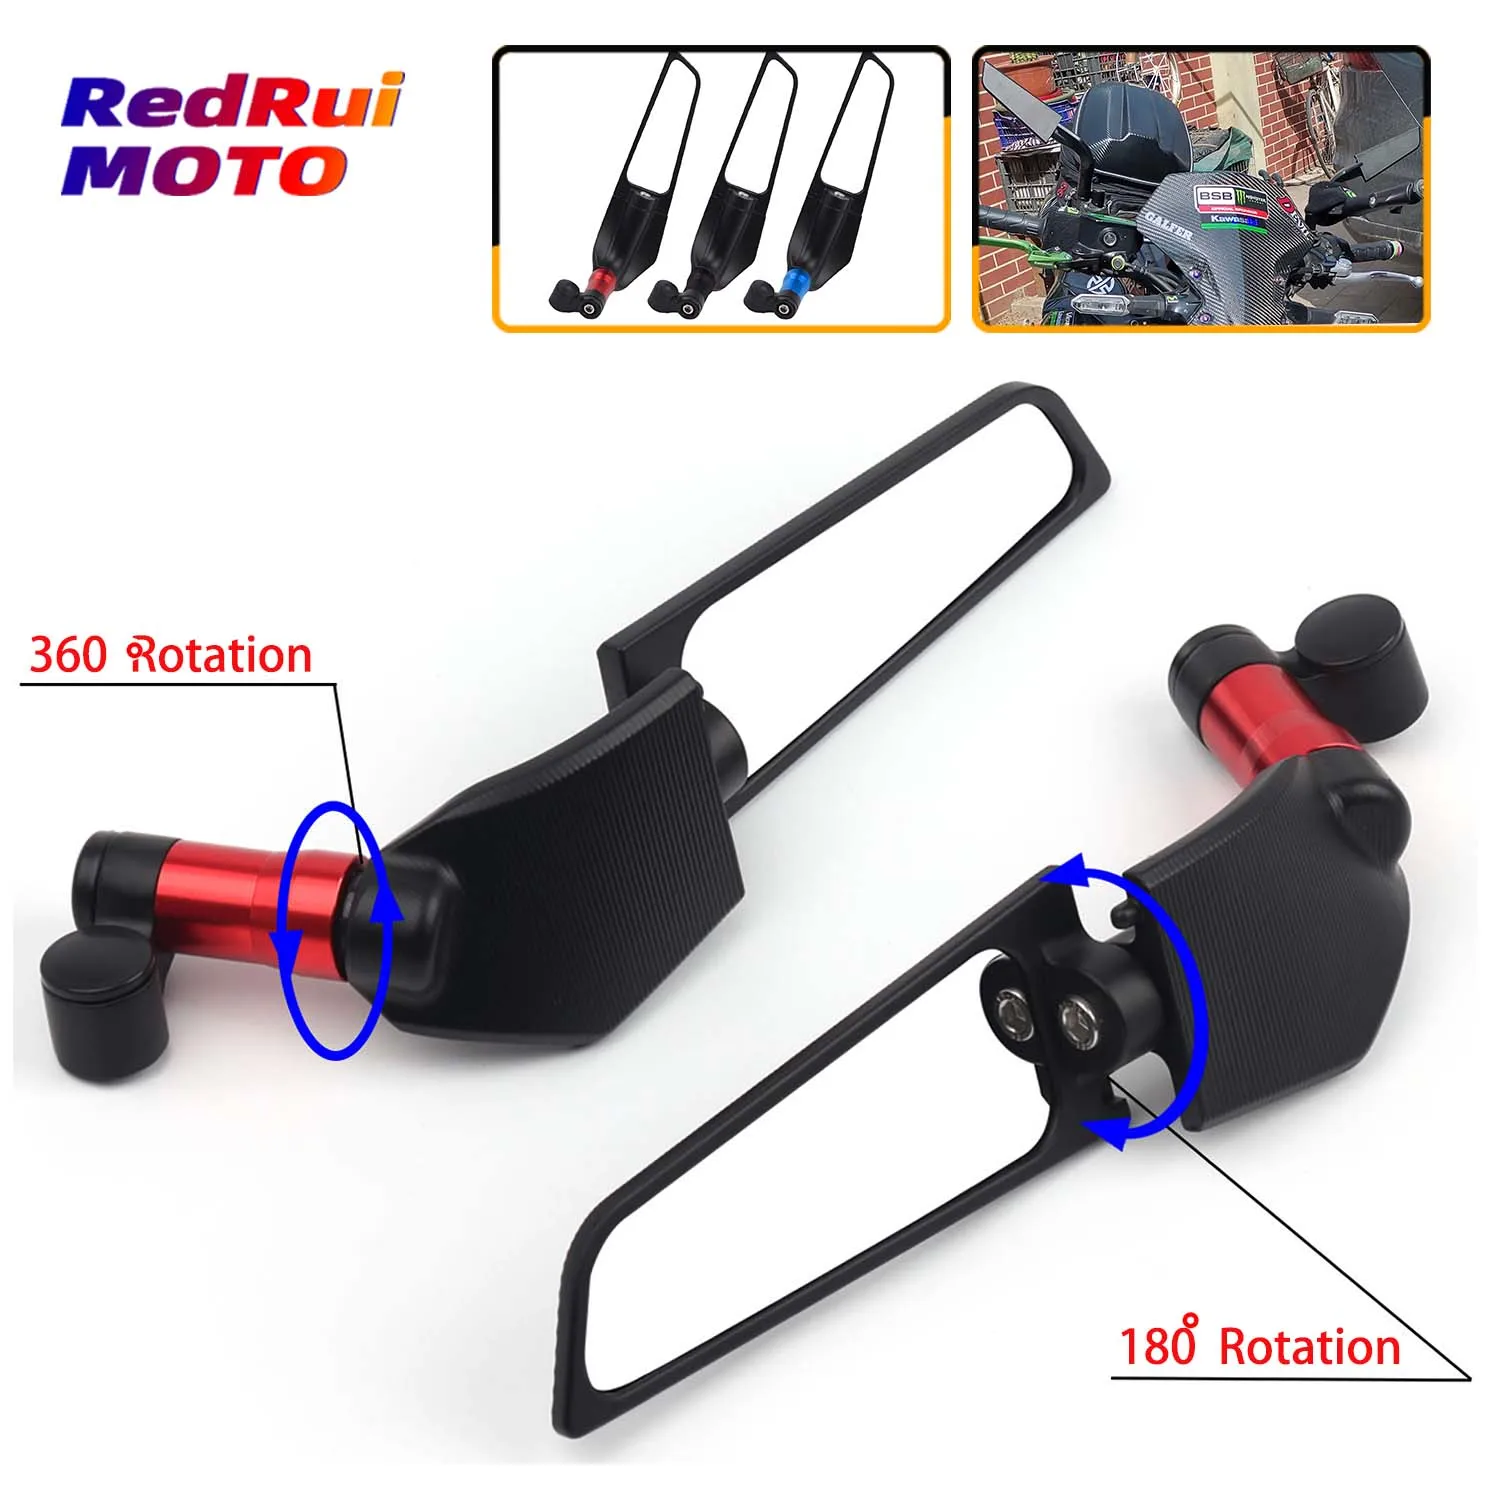 

Universal New fixed wind wing for Yamaha MT07 MT125 MT03 MT15 MT25 MT01 MT09 MT10 TRACER motorcycle Rotating rearview mirror